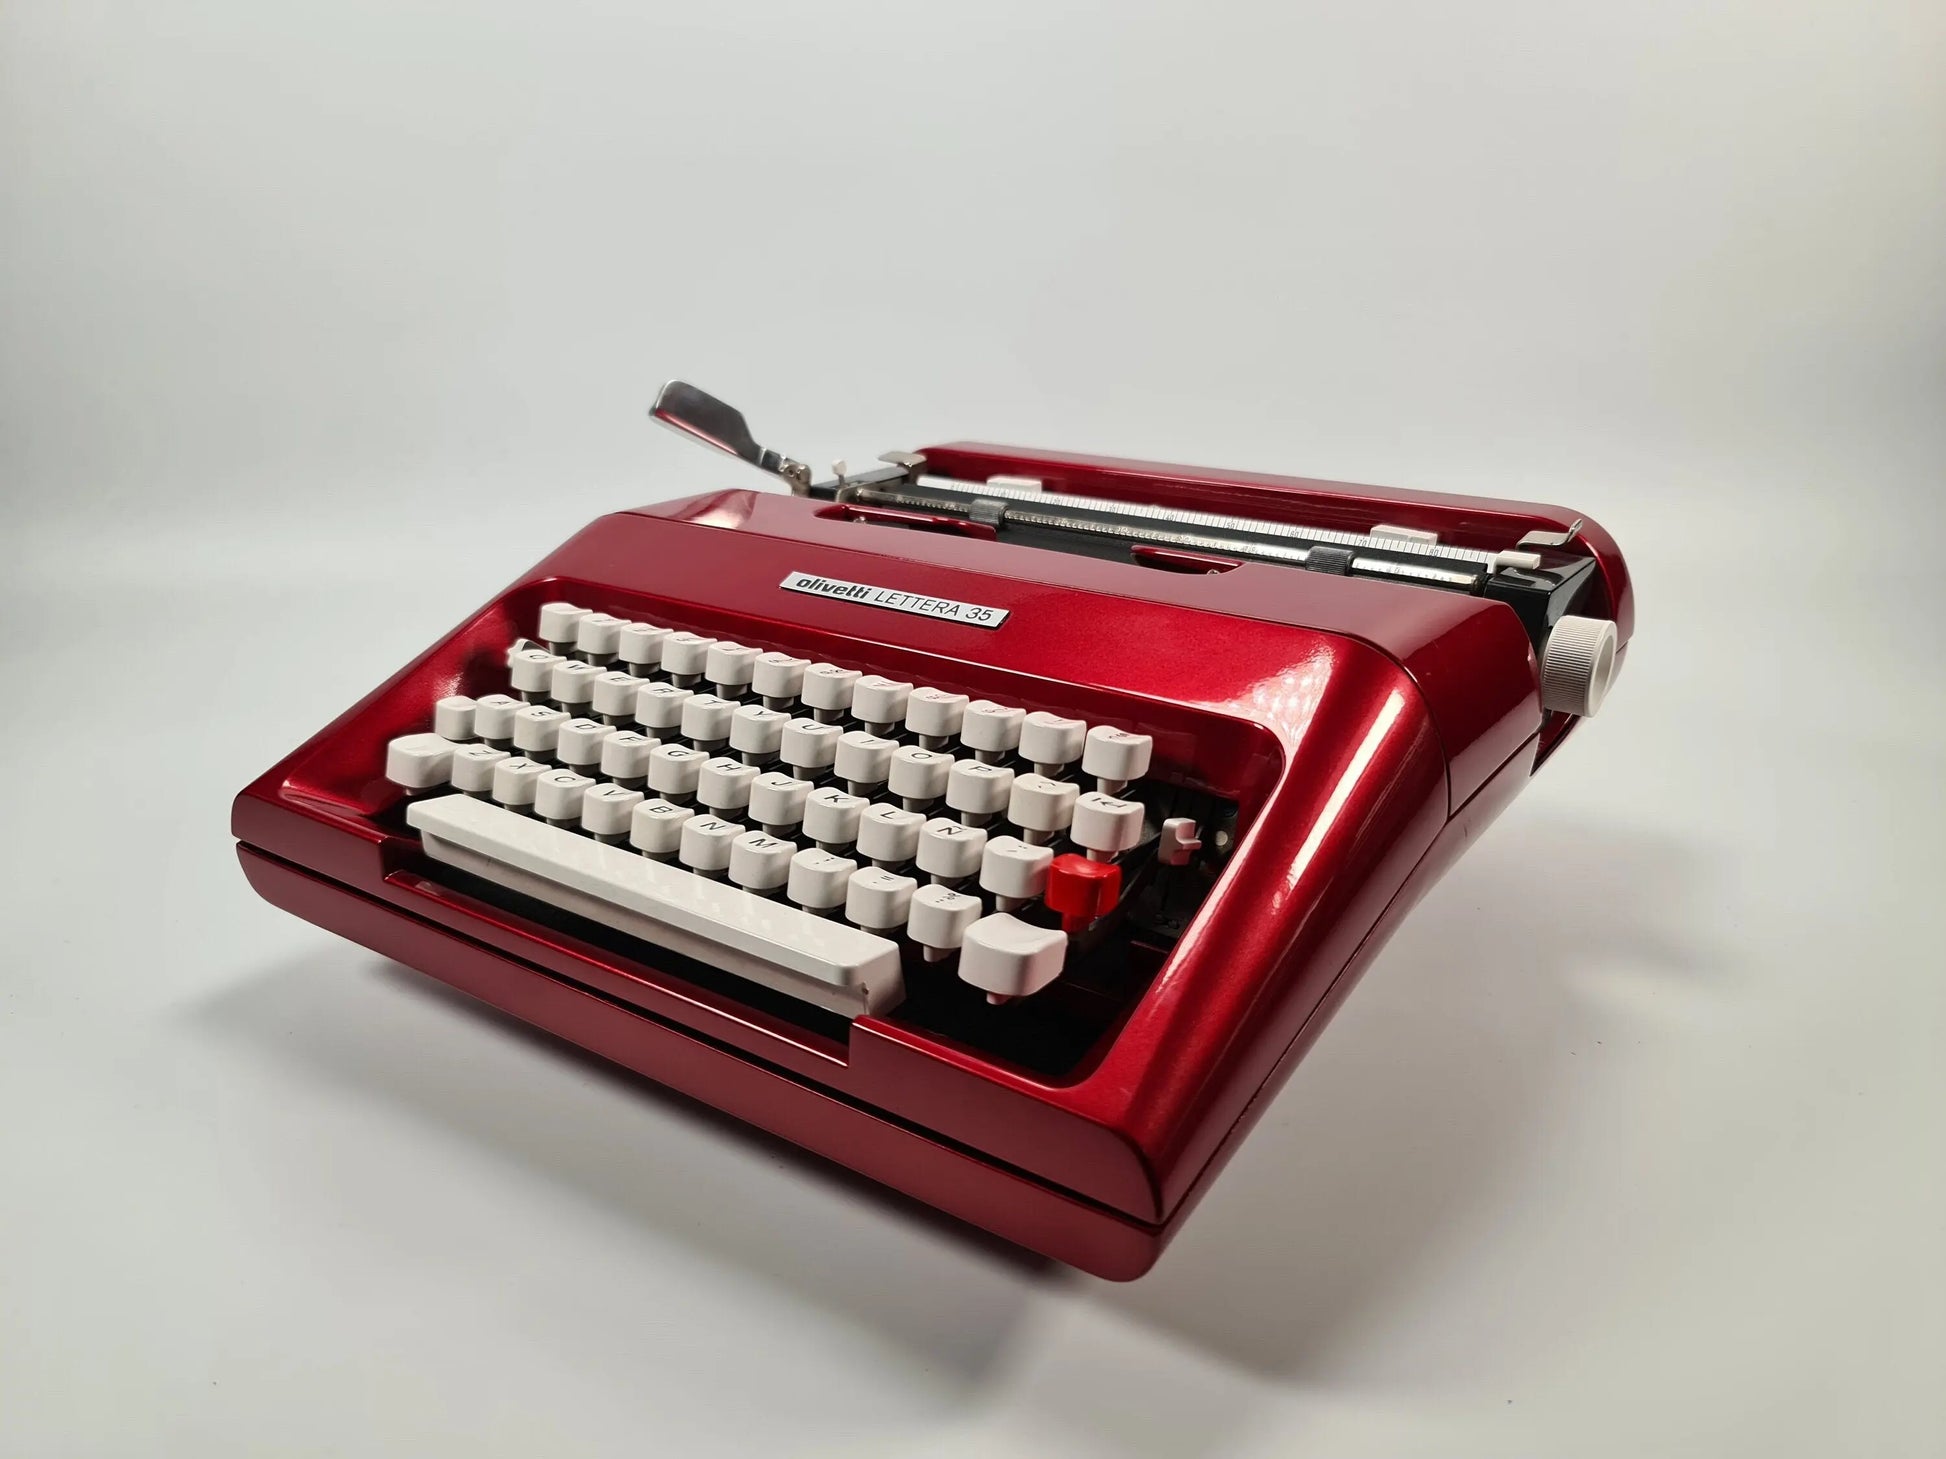 Limited Edition Olivetti Lettera 35 Burgundy Red, Vintage, Mint Condition, Manual Portable, Professionally Serviced by Typewriter.Company - ElGranero Typewriter.Company